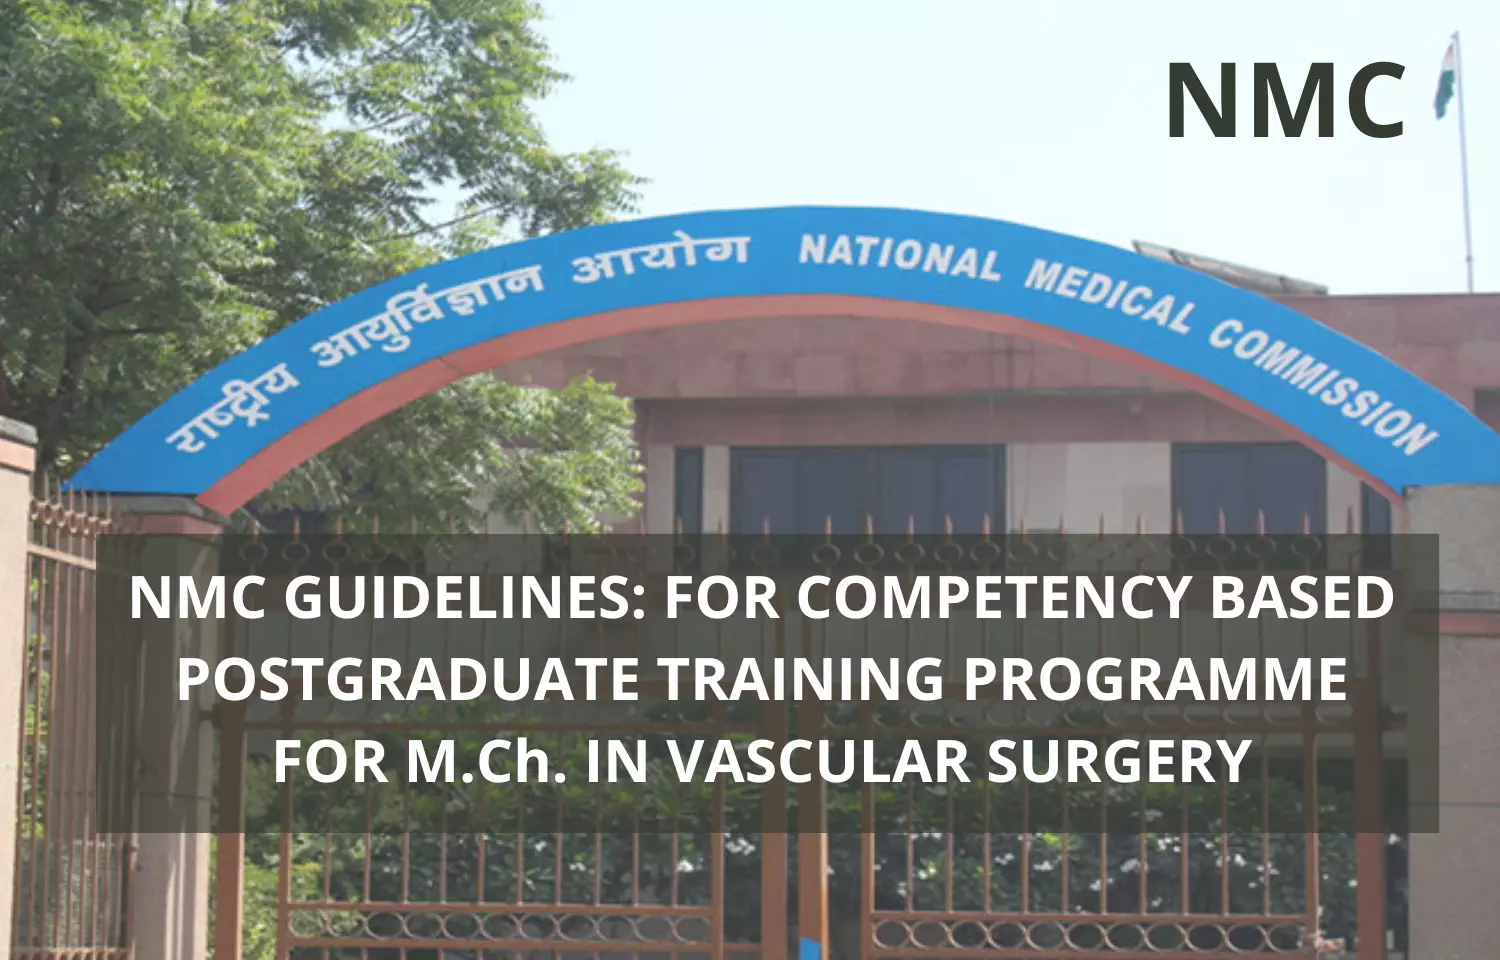 NMC Guidelines For Competency Based Training Programme For MCh In Vascular Surgery